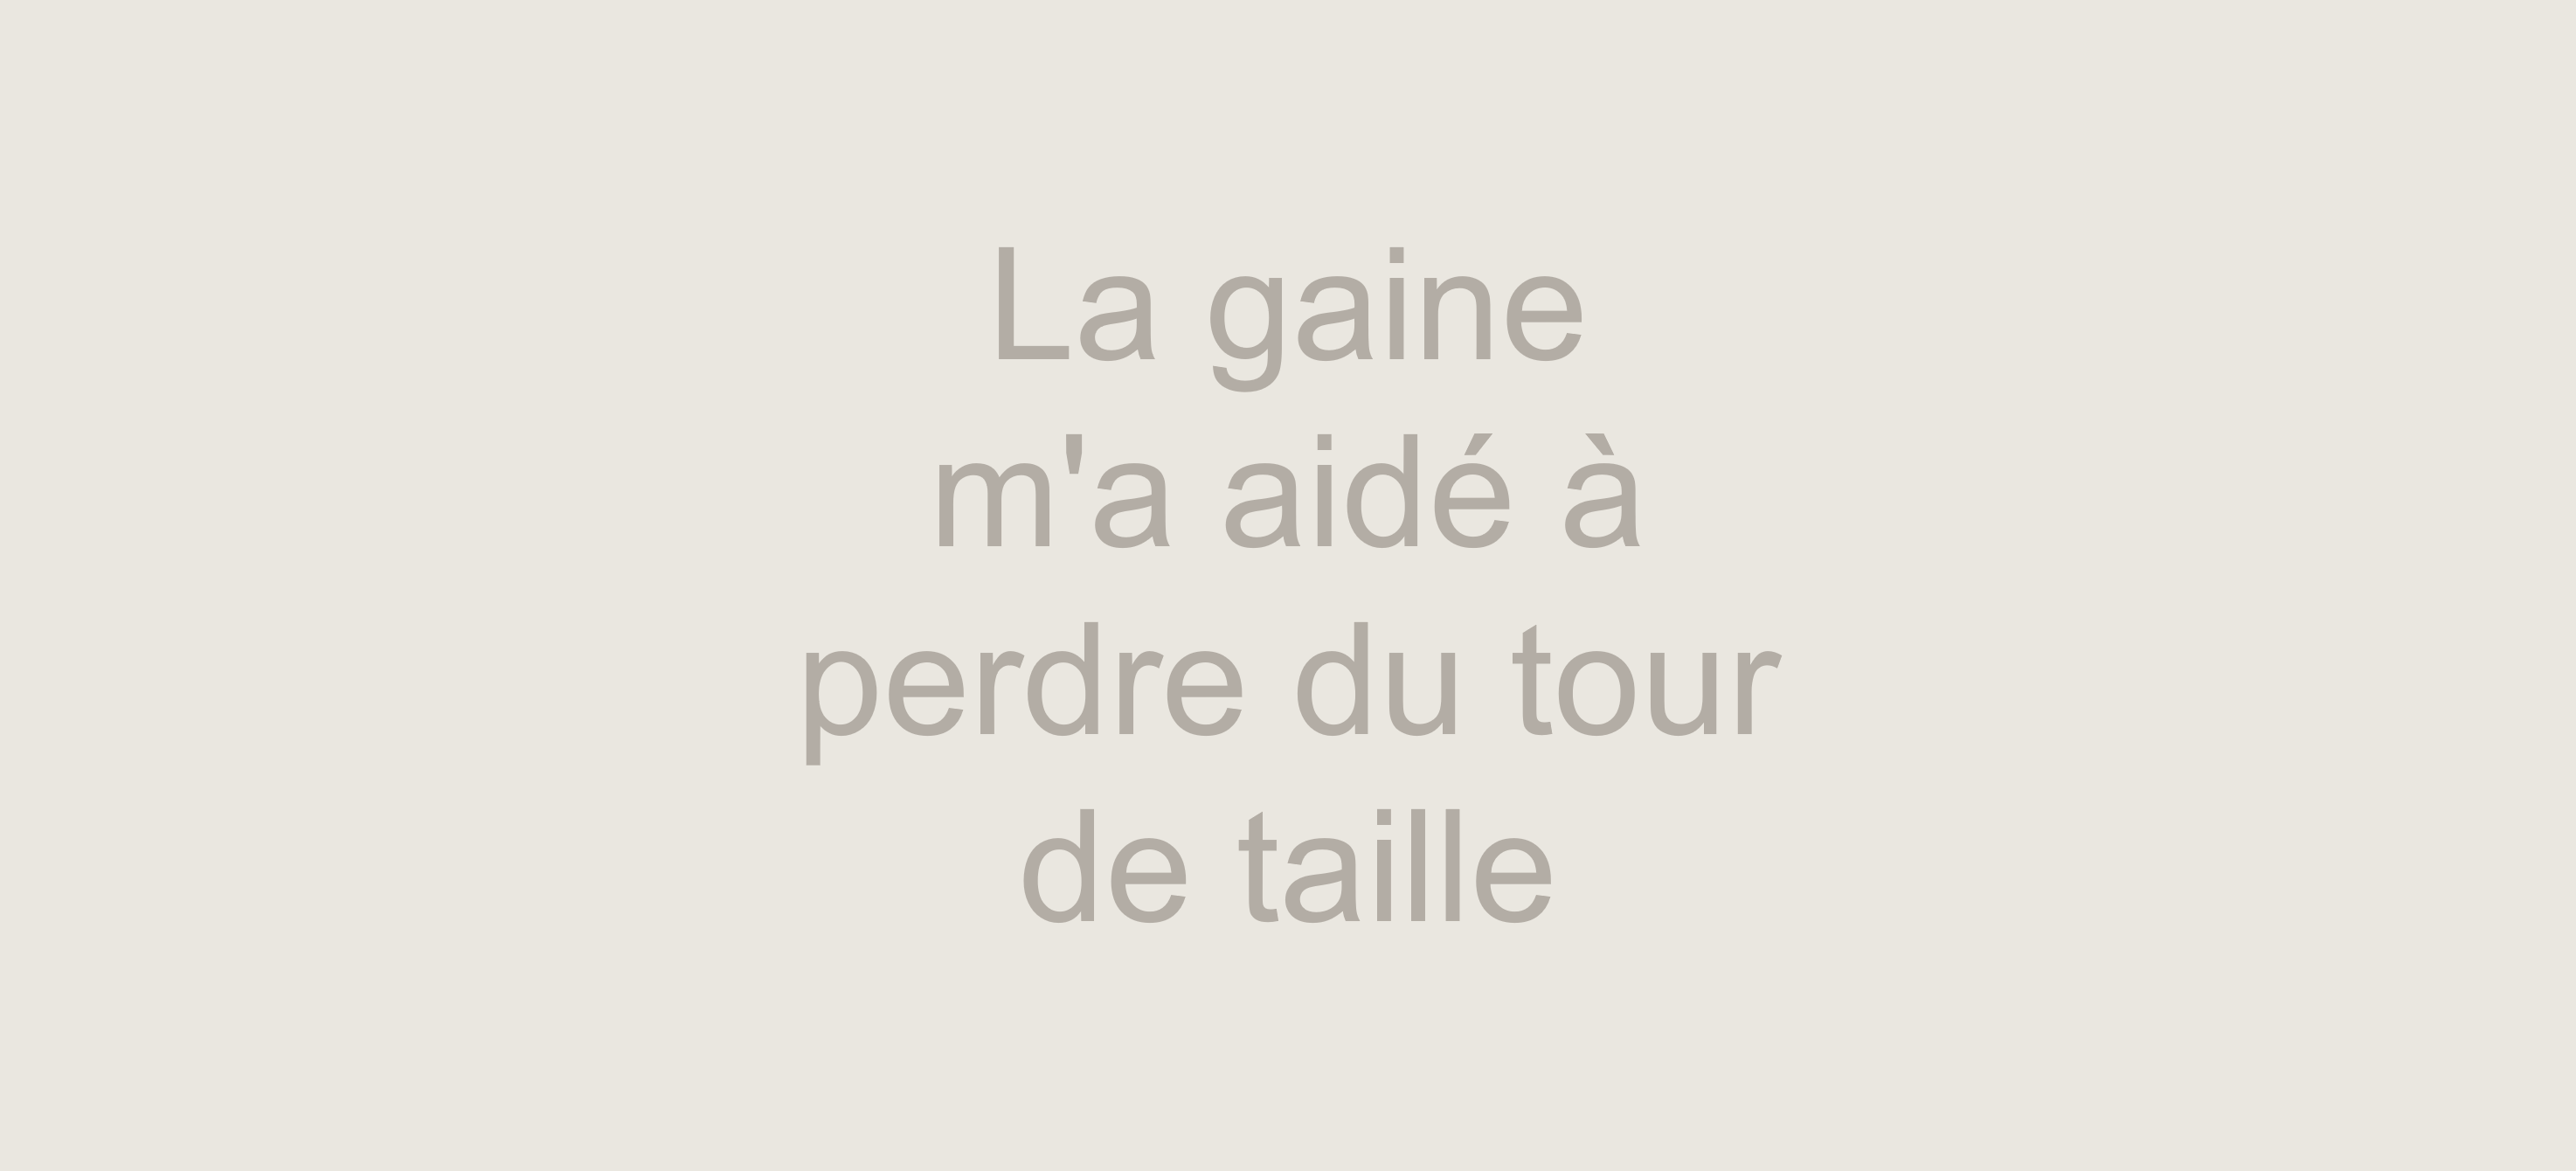 gaine aide perdre tour taille